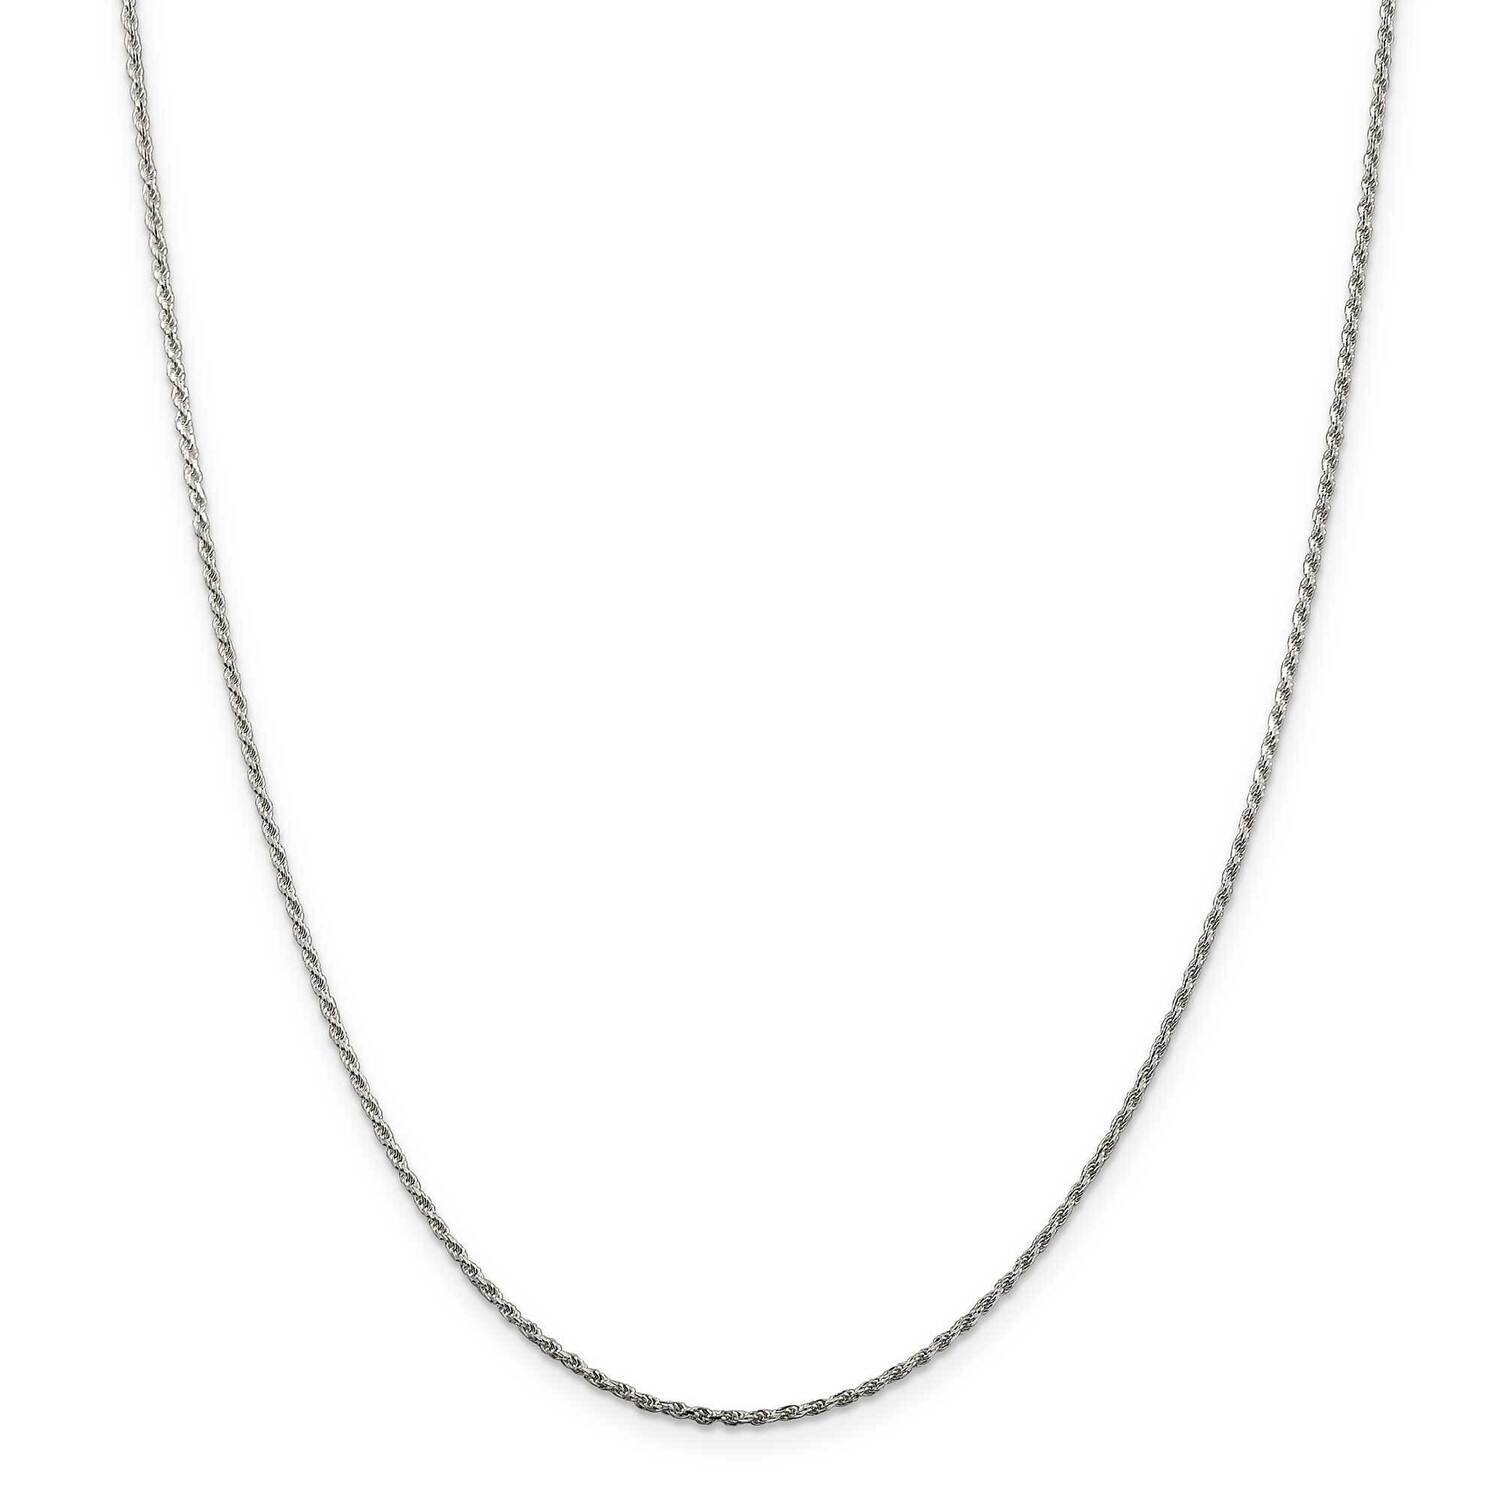 1.5mm Diamond-Cut Rope Chain 14 Inch Sterling Silver QDC020-14